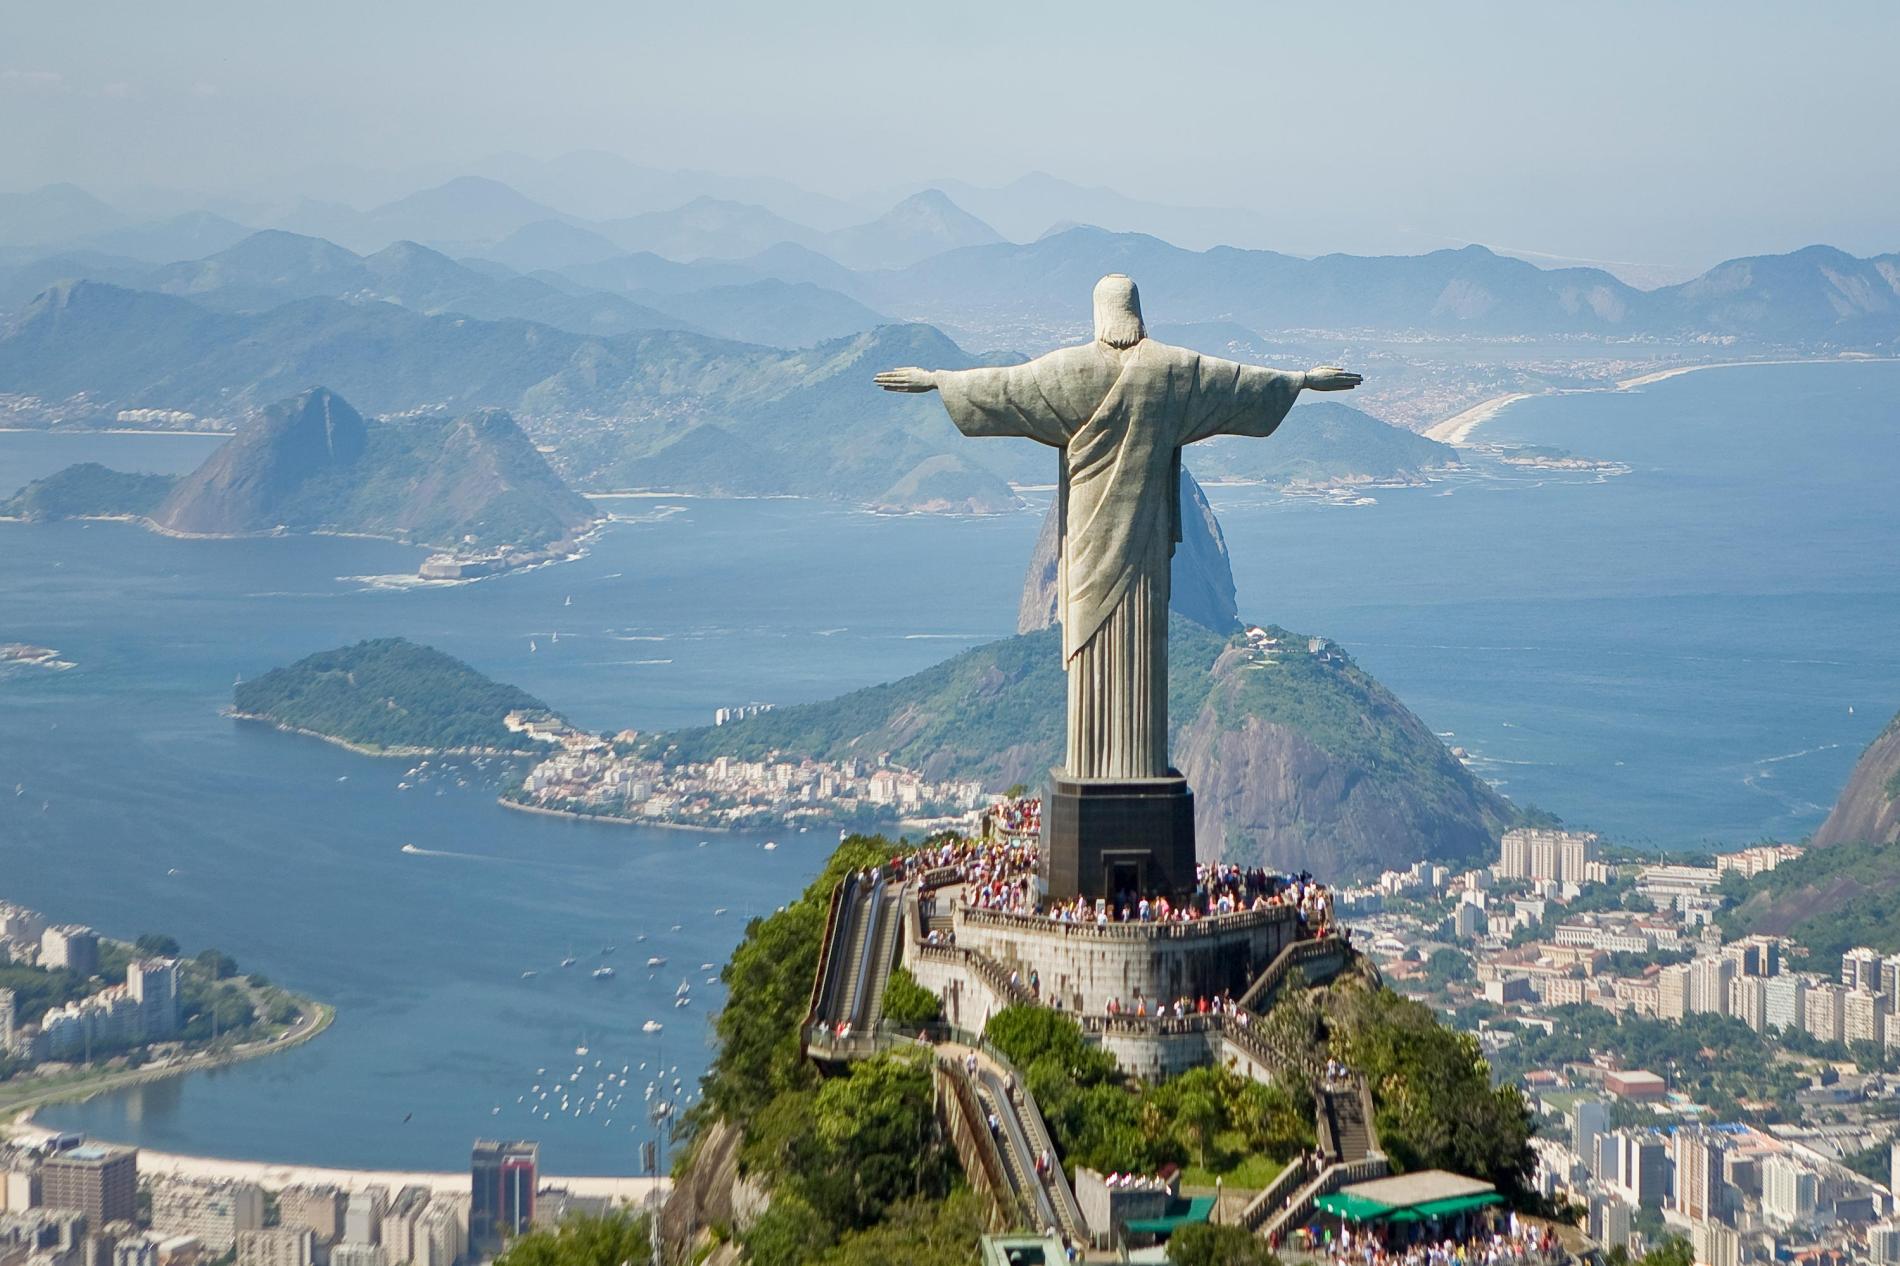 Baltimore MD to Rio de Janeiro $435 RT Airfares on COPA Airlines BE (Travel September - October 2023)